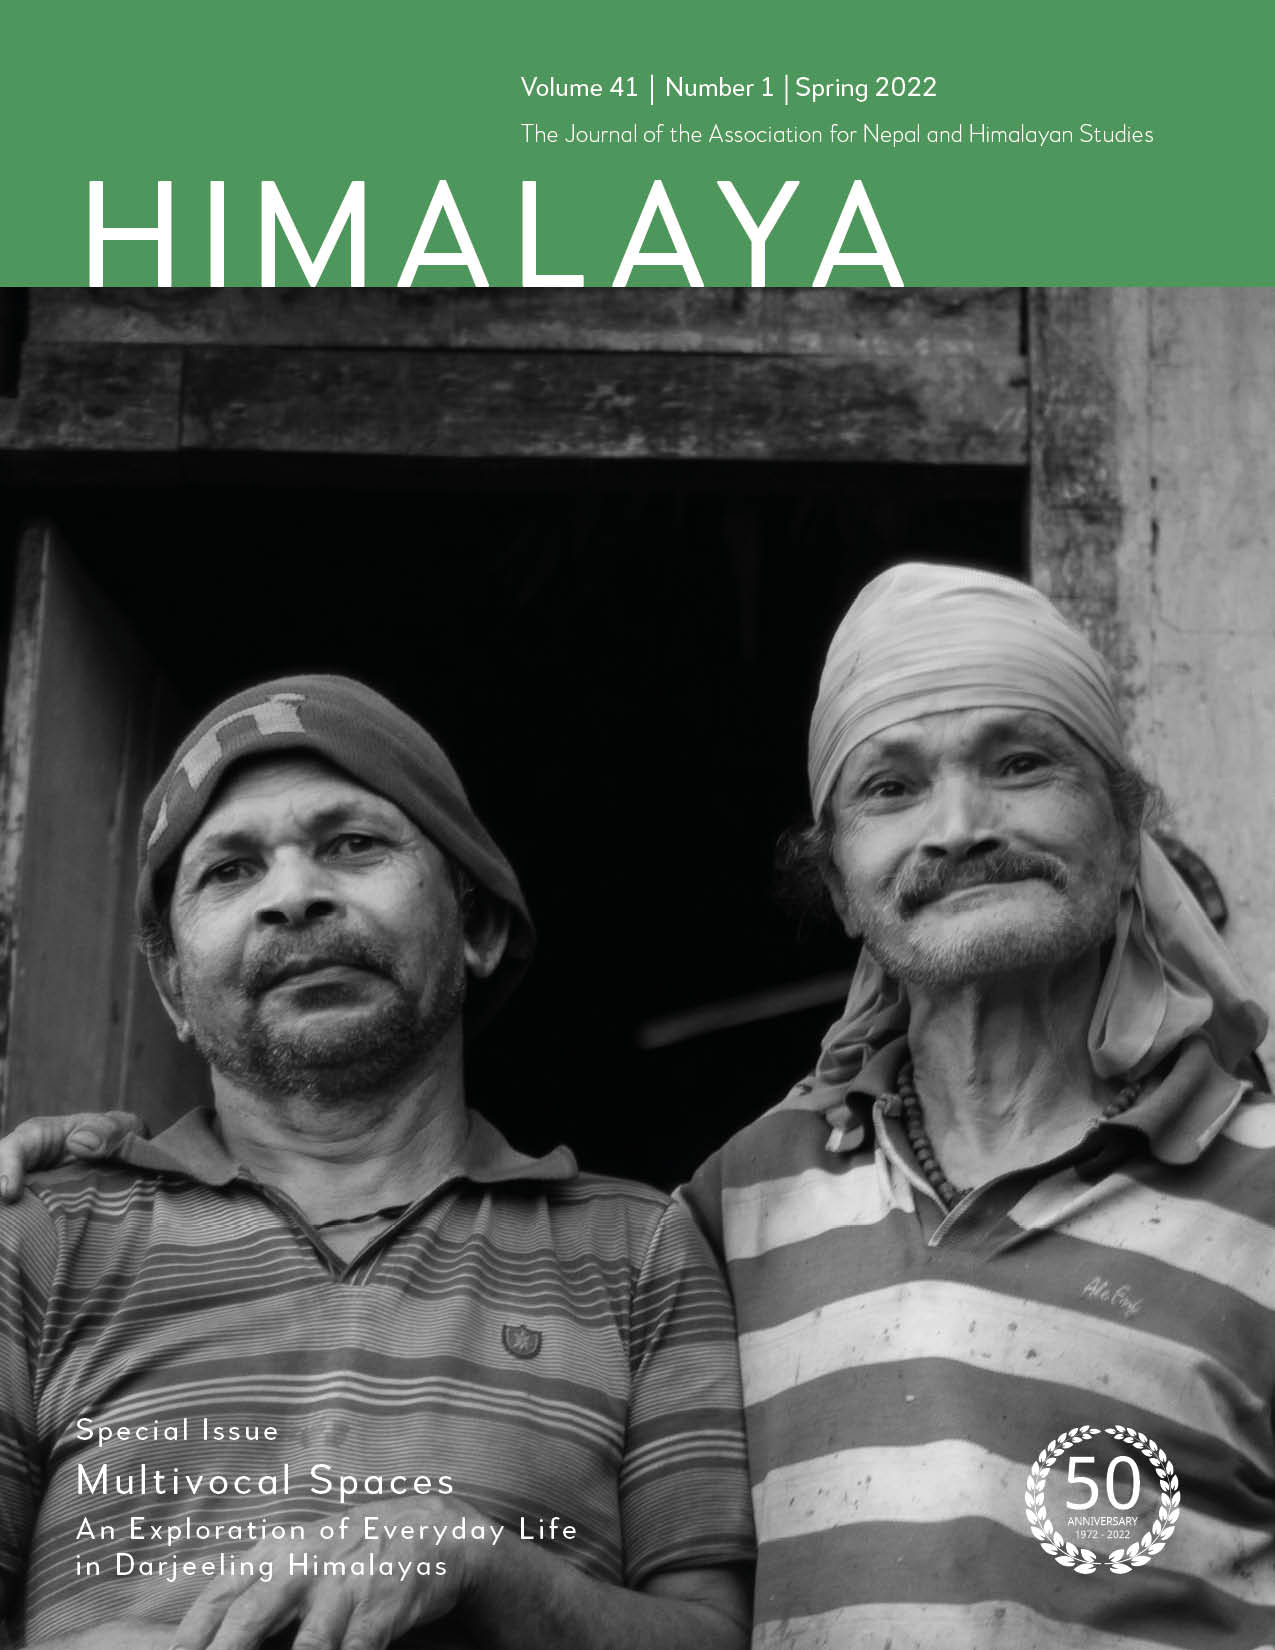 HIMALAYA 41.1 - Special Issue Cover, Multivocal Spaces: An Exploration of Everyday Life in Darjeeling Himalayas